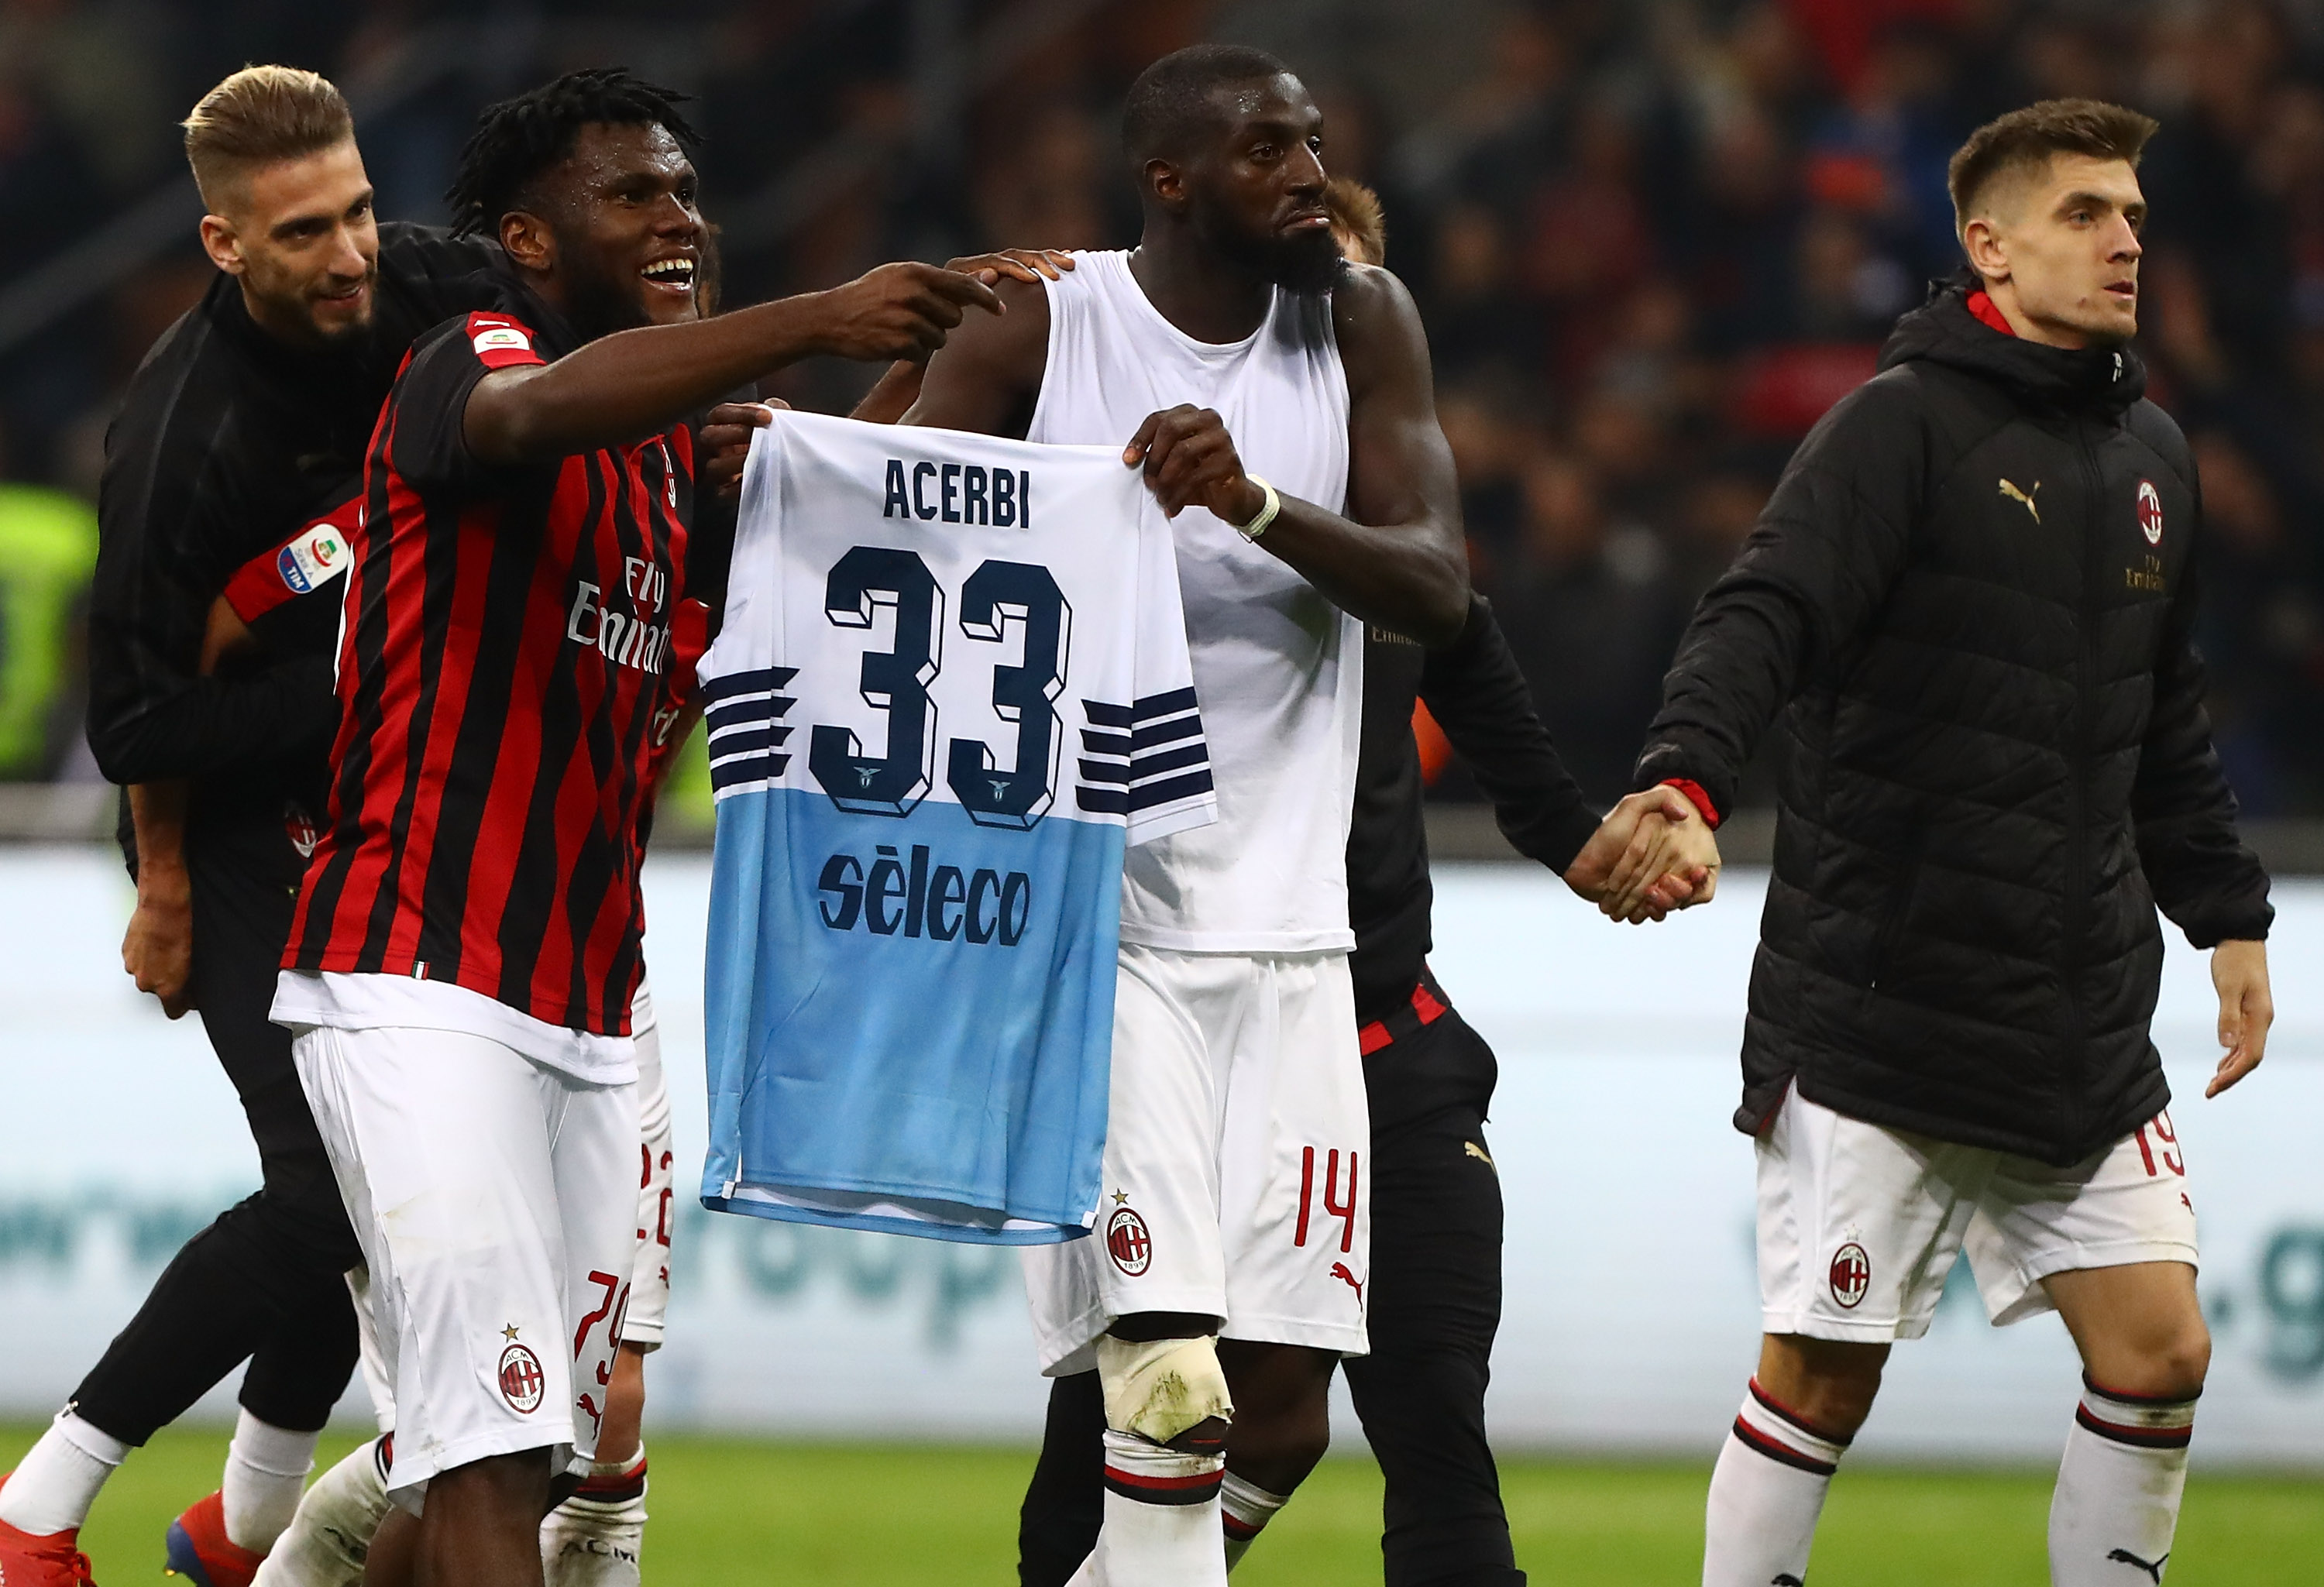 MILAN, ITALY - APRIL 13:  (L-R) Samuel Castillejo, Franck Kessie, Tiemoue Bakayoko and Krzysztof Piatek of AC Milan celebrate a victory at the end of the Serie A match between AC Milan and SS Lazio at Stadio Giuseppe Meazza on April 13, 2019 in Milan, Italy.  (Photo by Marco Luzzani/Getty Images)